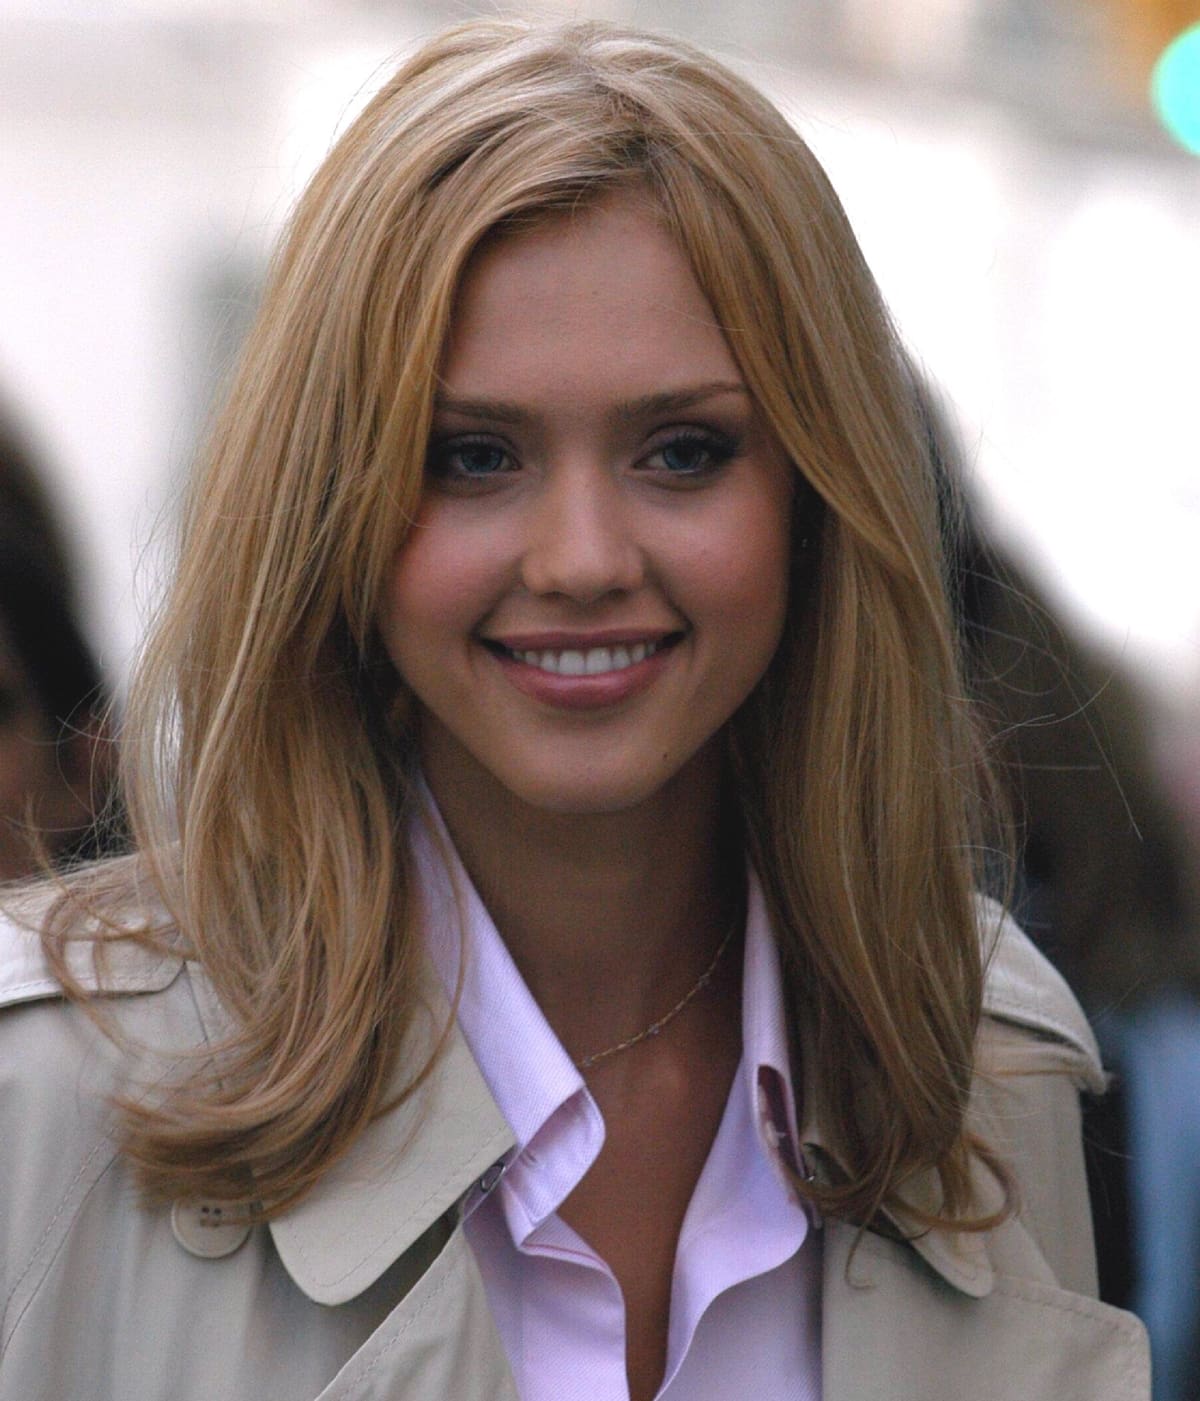 How Old Was Jessica Alba Filming Fantastic Four as Invisible Woman?